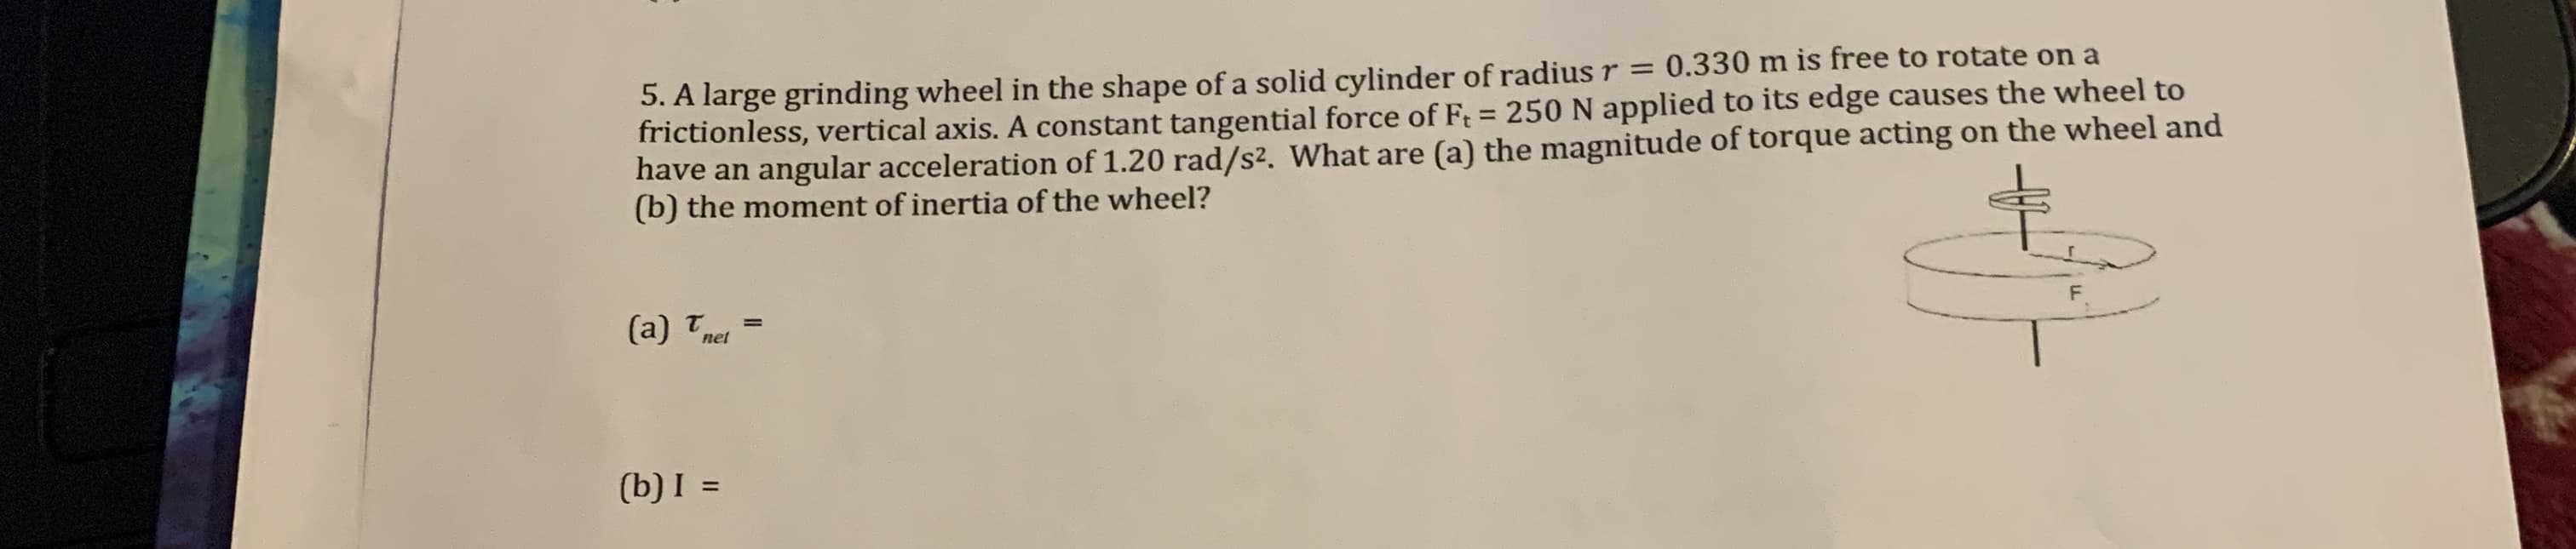 5. A large grinding wheel in the shape of a solid cylinder of radius r = 0.330 m is free to rotate on a
frictionless, vertical axis. A constant tangential force of Ft = 250 N applied to its edge causes the wheel to
have an angular acceleration of 1.20 rad/s². What are (a) the magnitude of torque acting on the wheel and
(b) the moment of inertia of the wheel?
%3D
net
(b) I =
%3D
